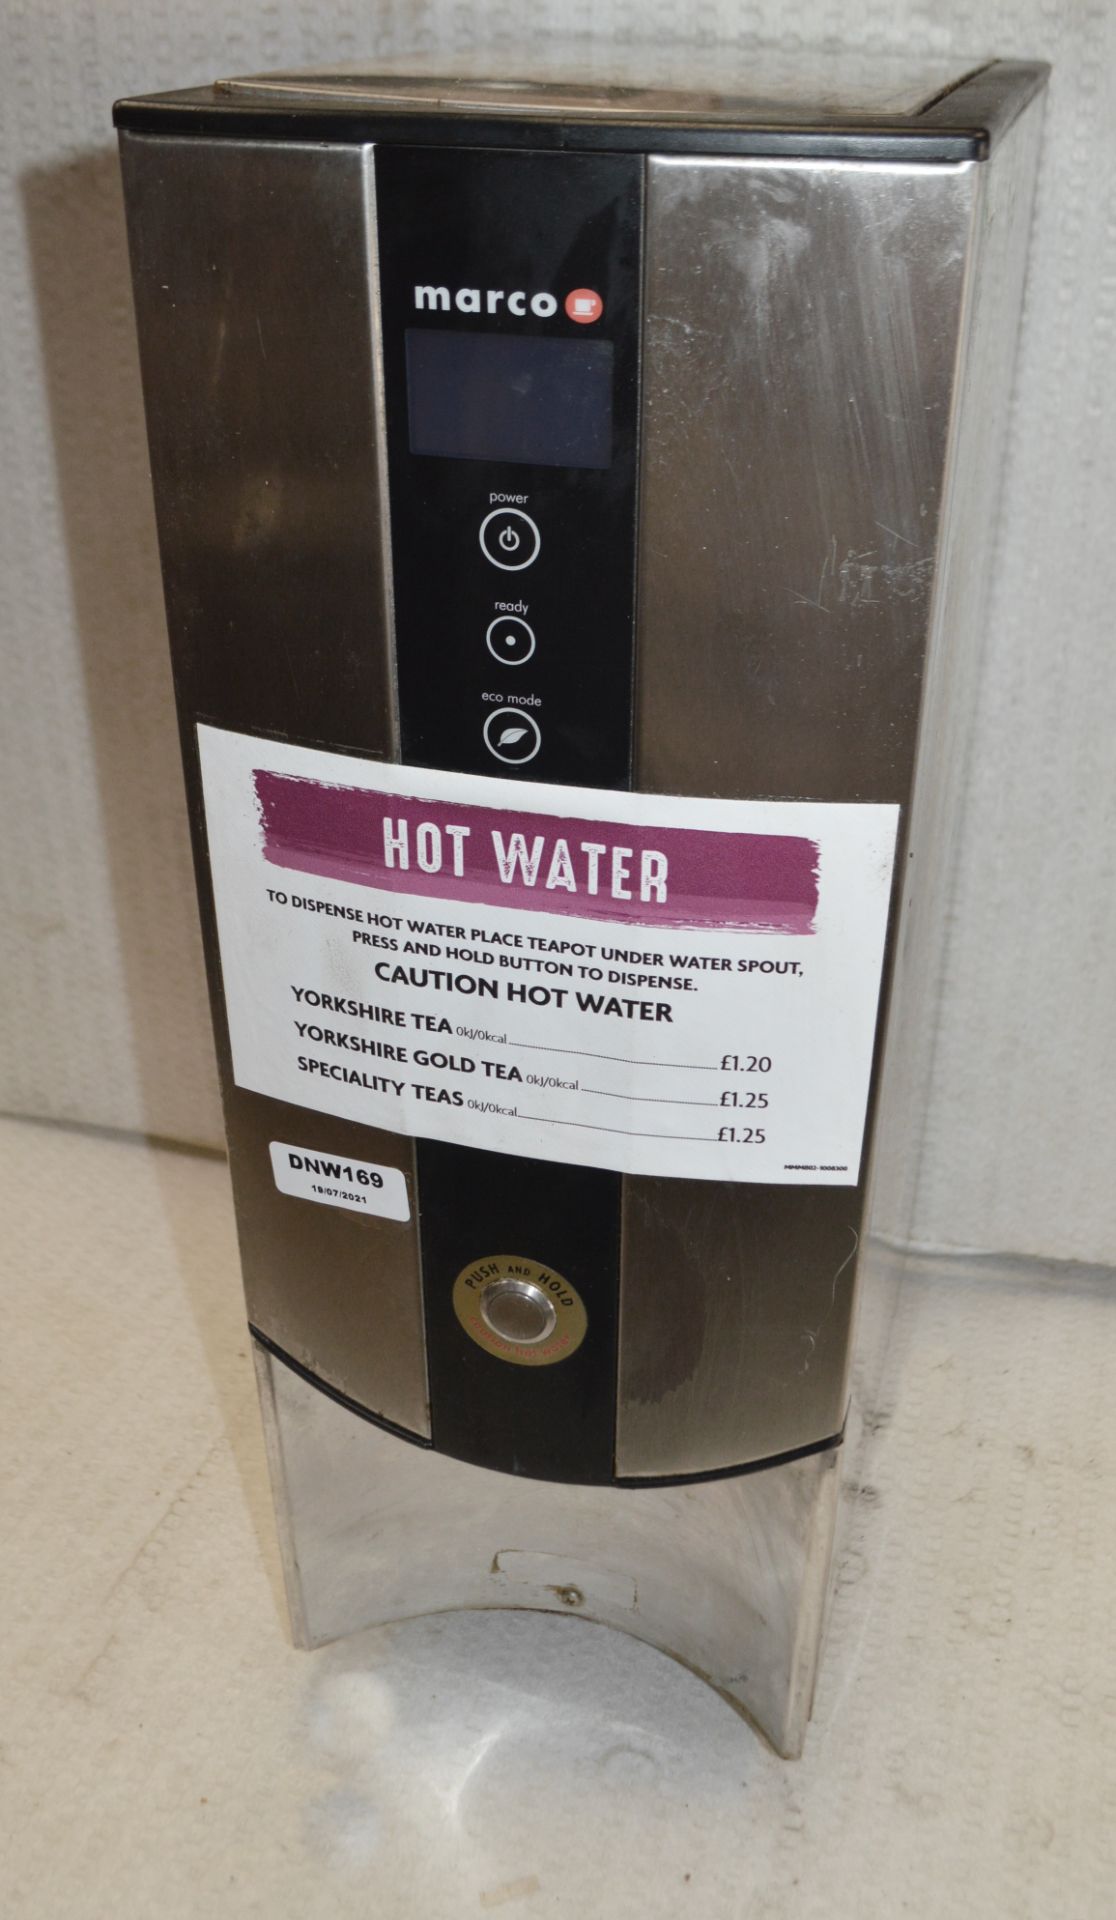 1 x Marco Eco Smart Boiling Hot Water Dispenser Model:Ecosmart PB10  - Mains Water Feed - Recently - Image 2 of 6